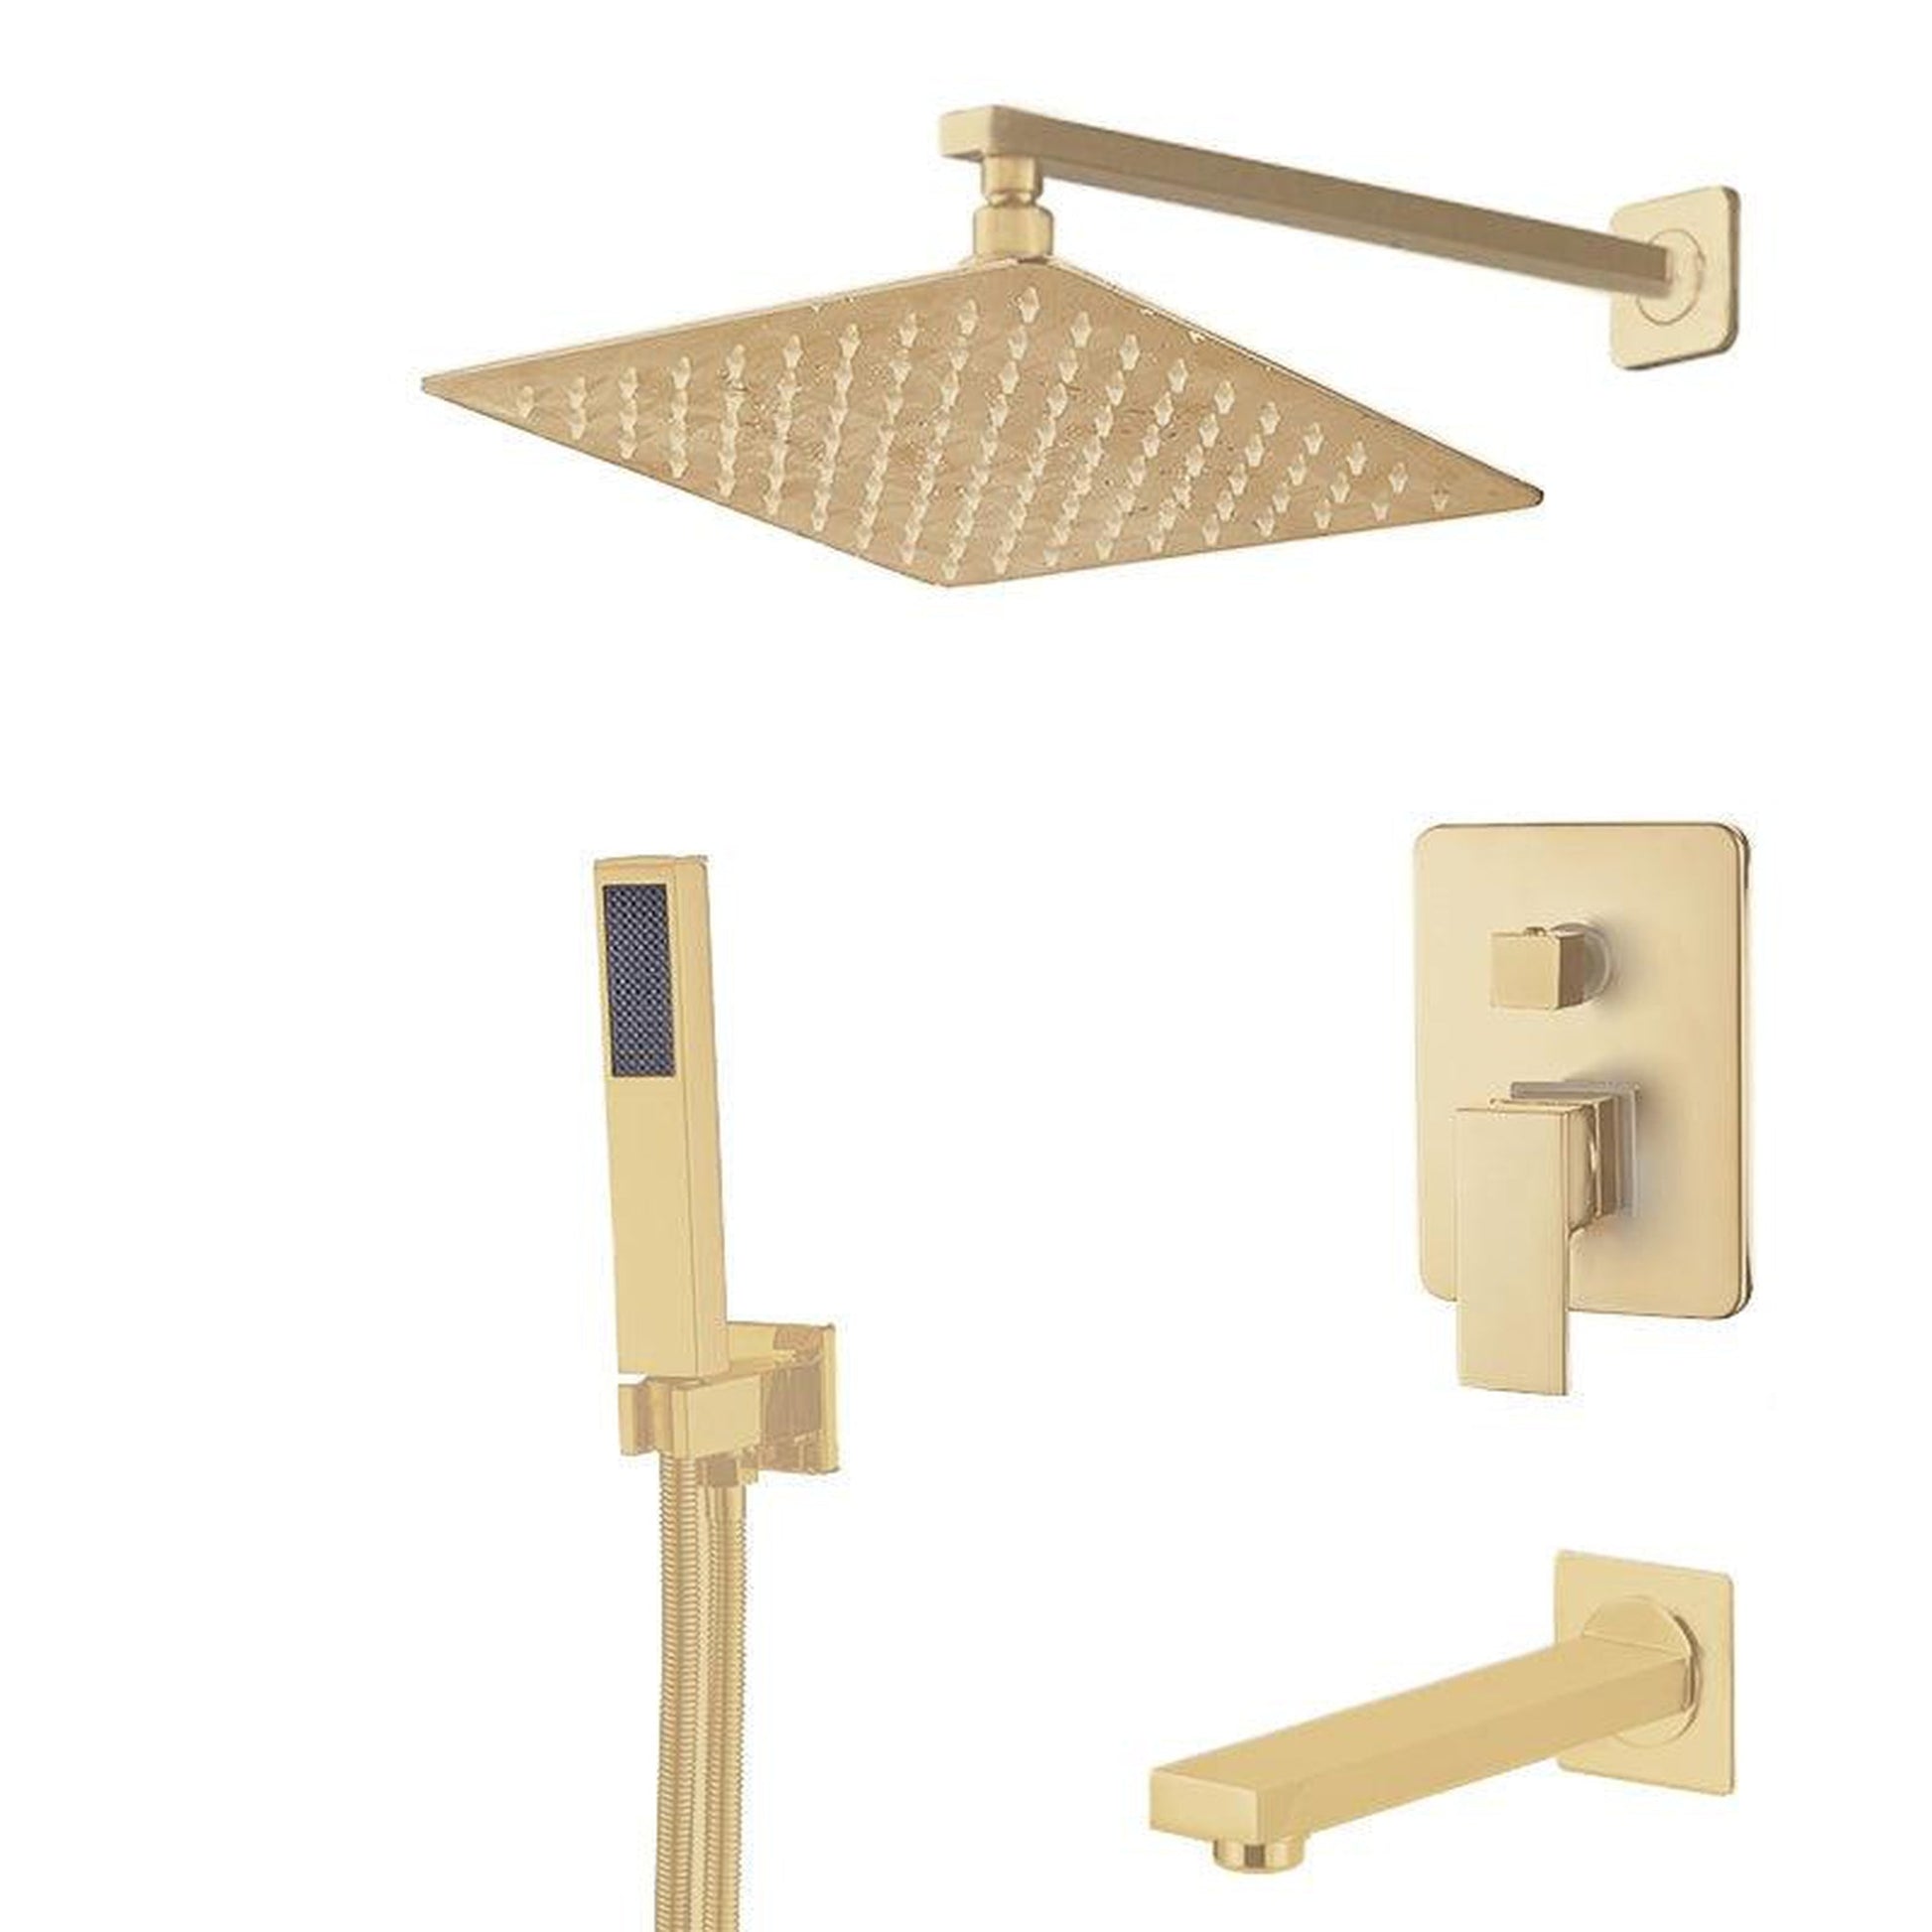 FontanaShowers Verona Creative Luxury 12" Gold Square Wall-Mounted 3-Way Single Handle Mixer Shower System With Hand Shower and Tub Spout